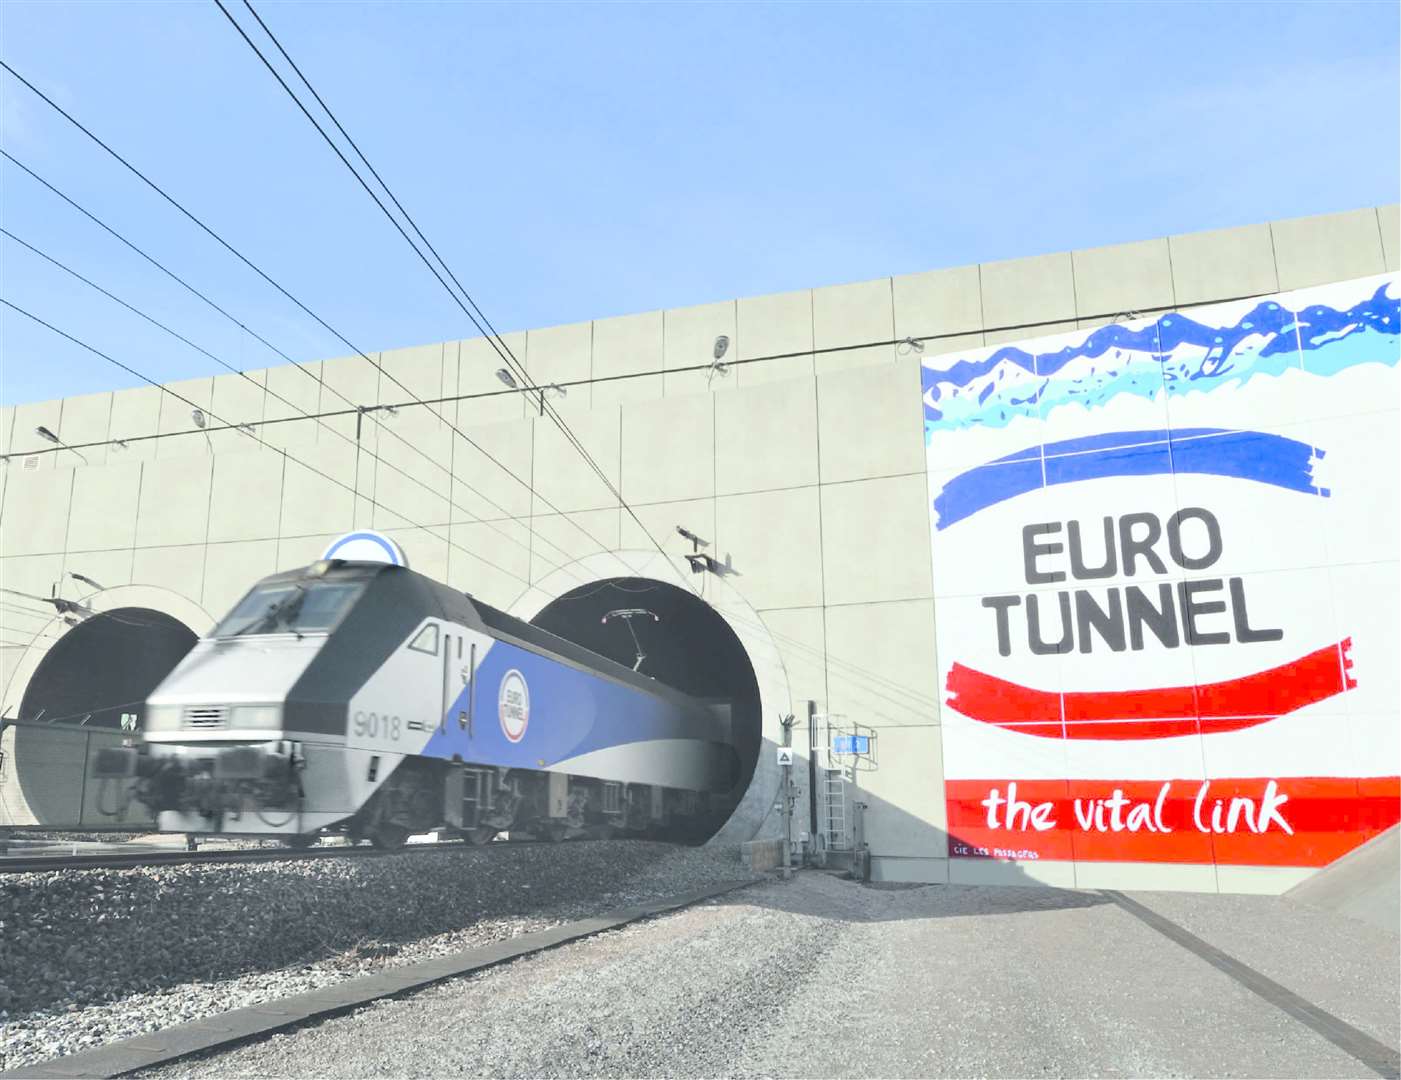 Eurotunnel chiefs are counting the cost of travel restrictions - but believe the service will rebound once they are lifted